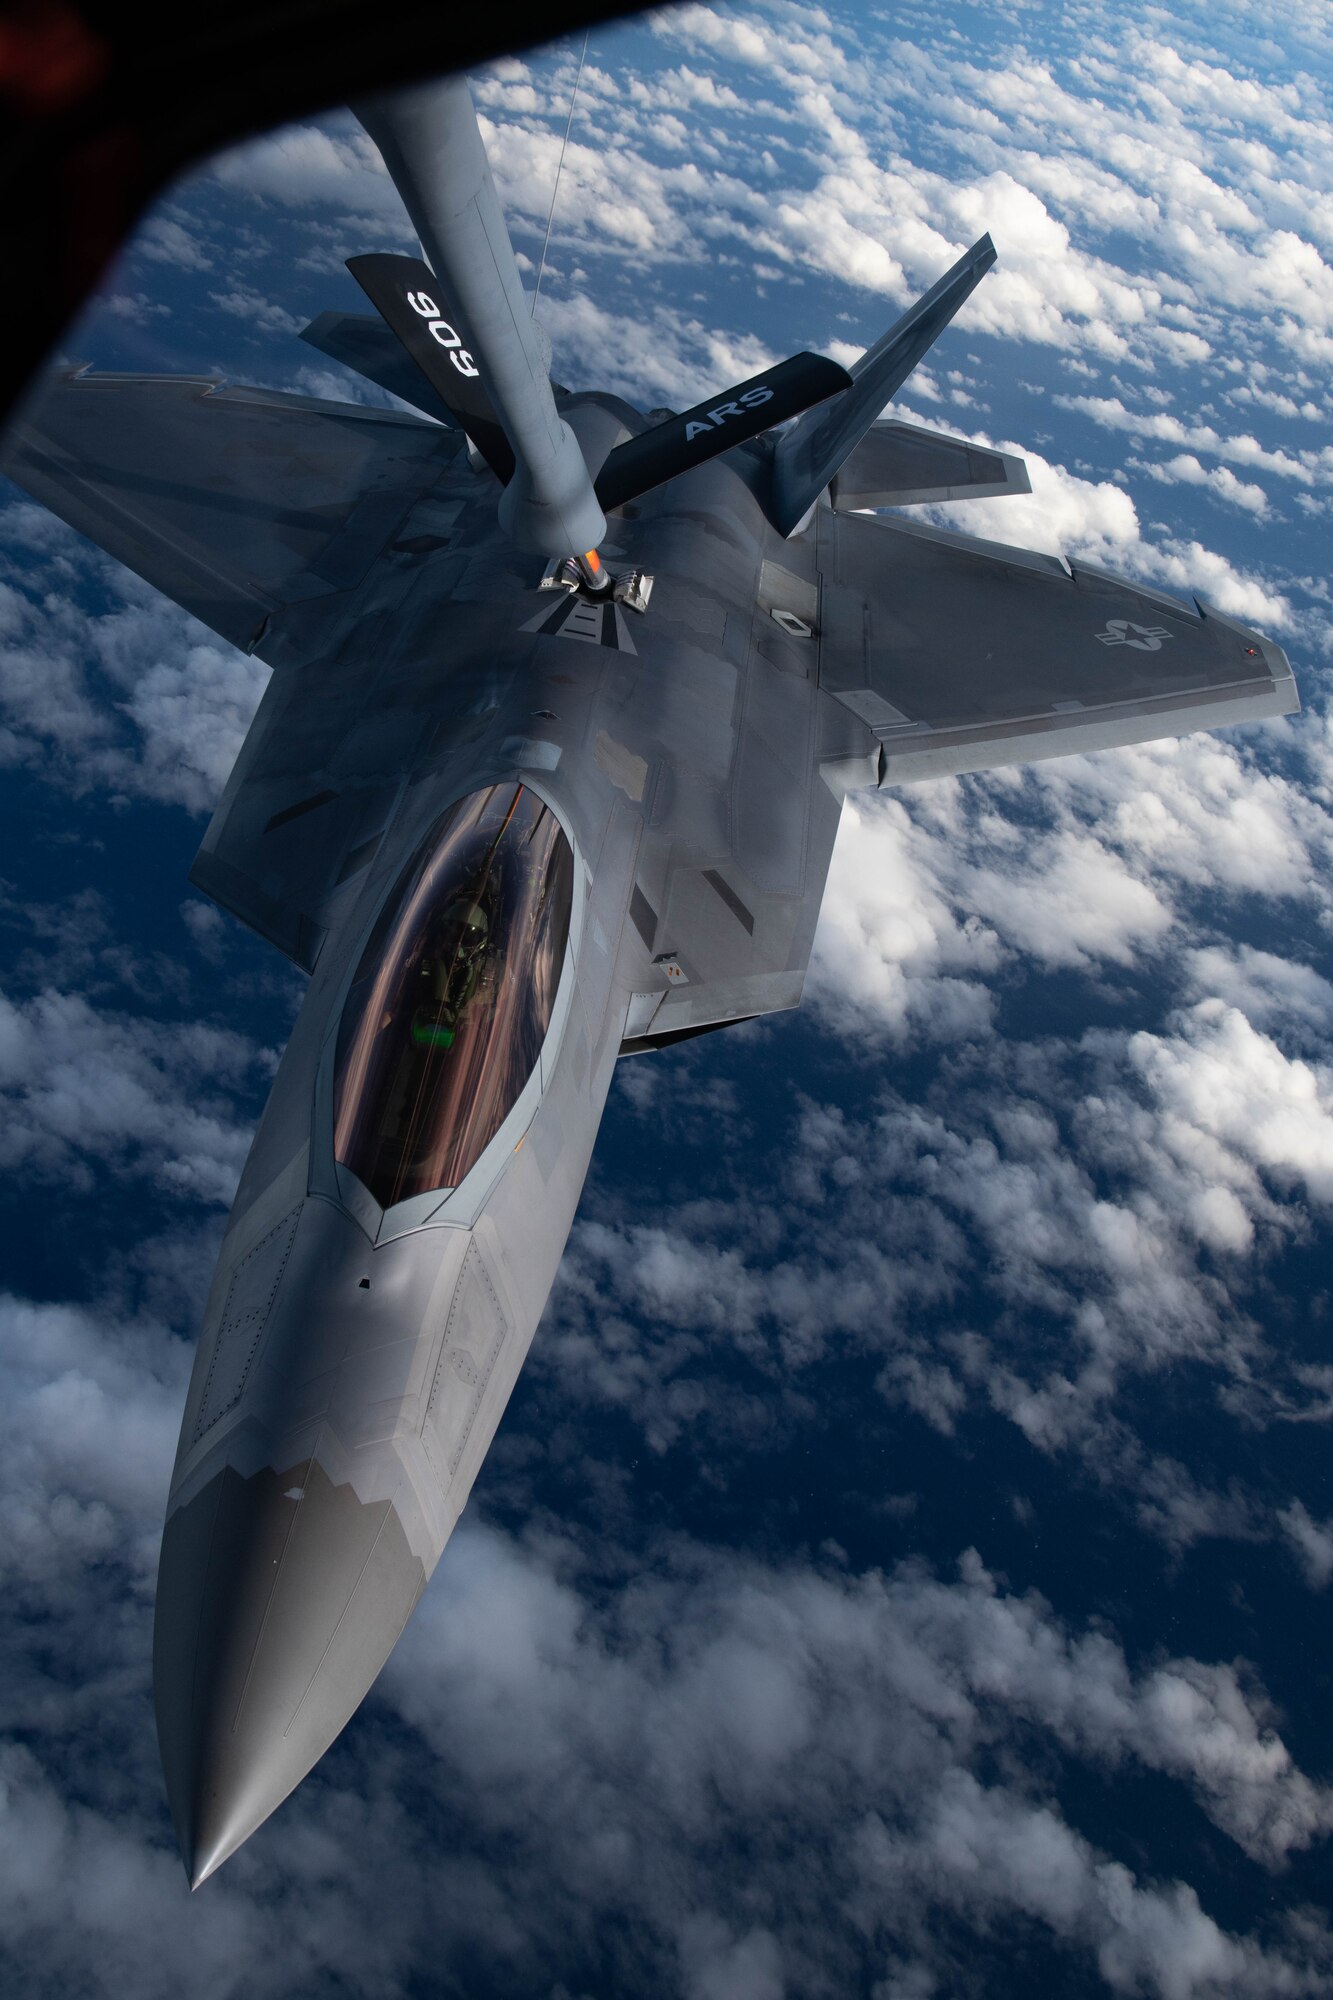 A jet gets refueled in the air.